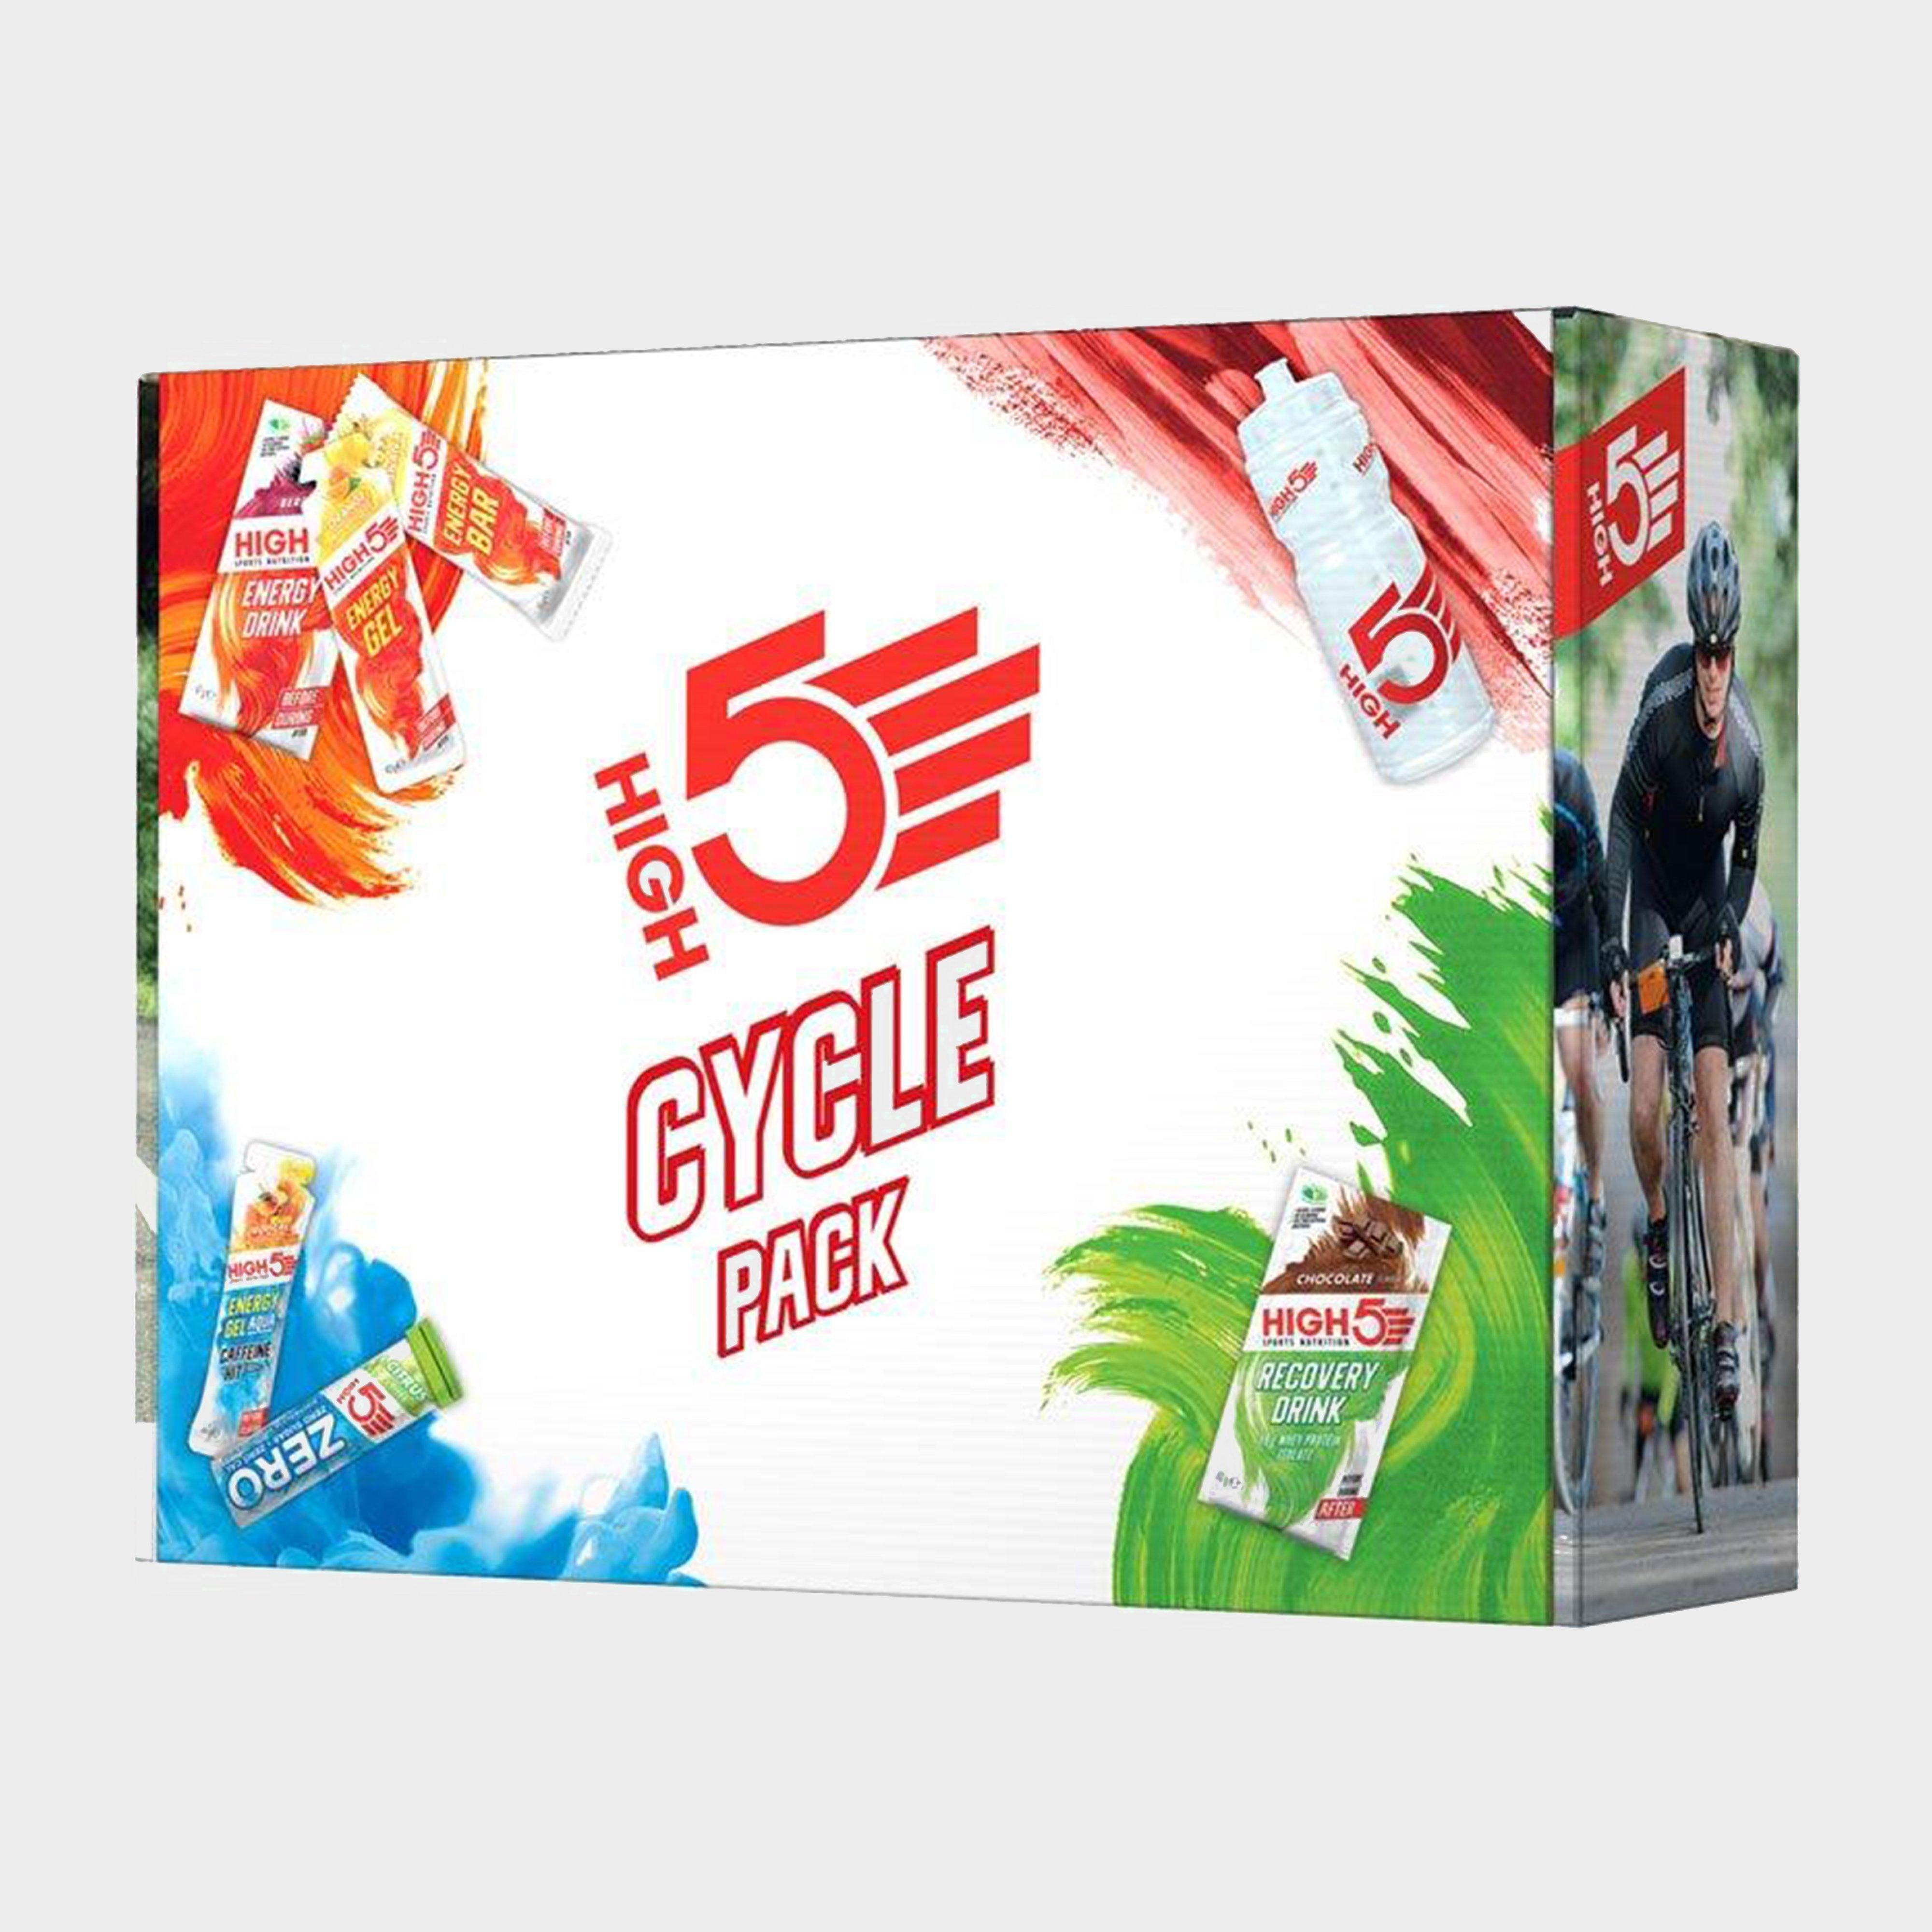 High5 Cycle Pack Review